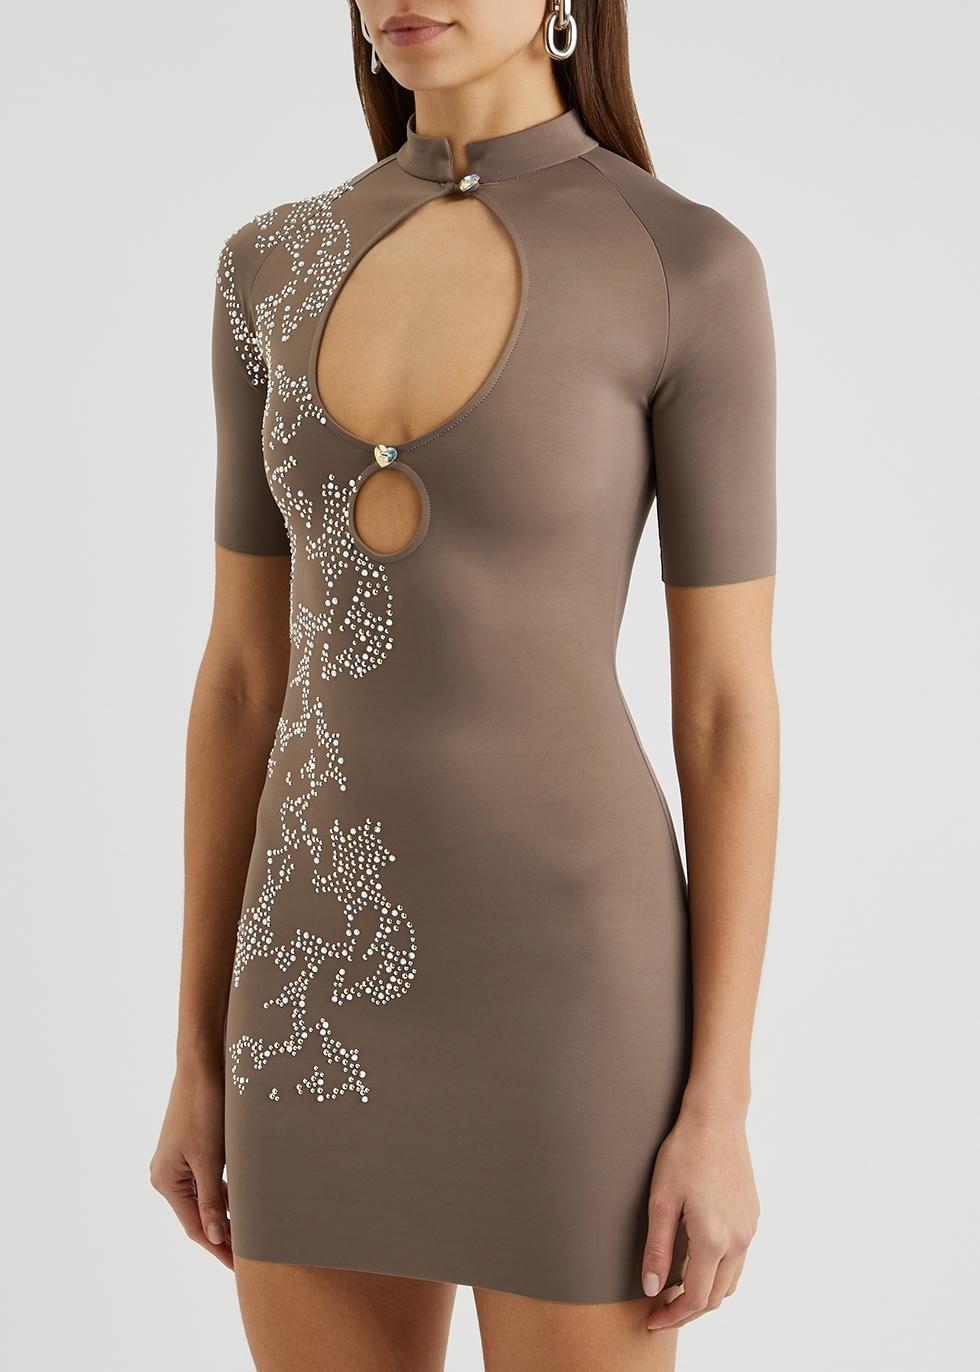 Poster Girl Daisy Embellished Cut-out Mini Dress in Brown | Lyst